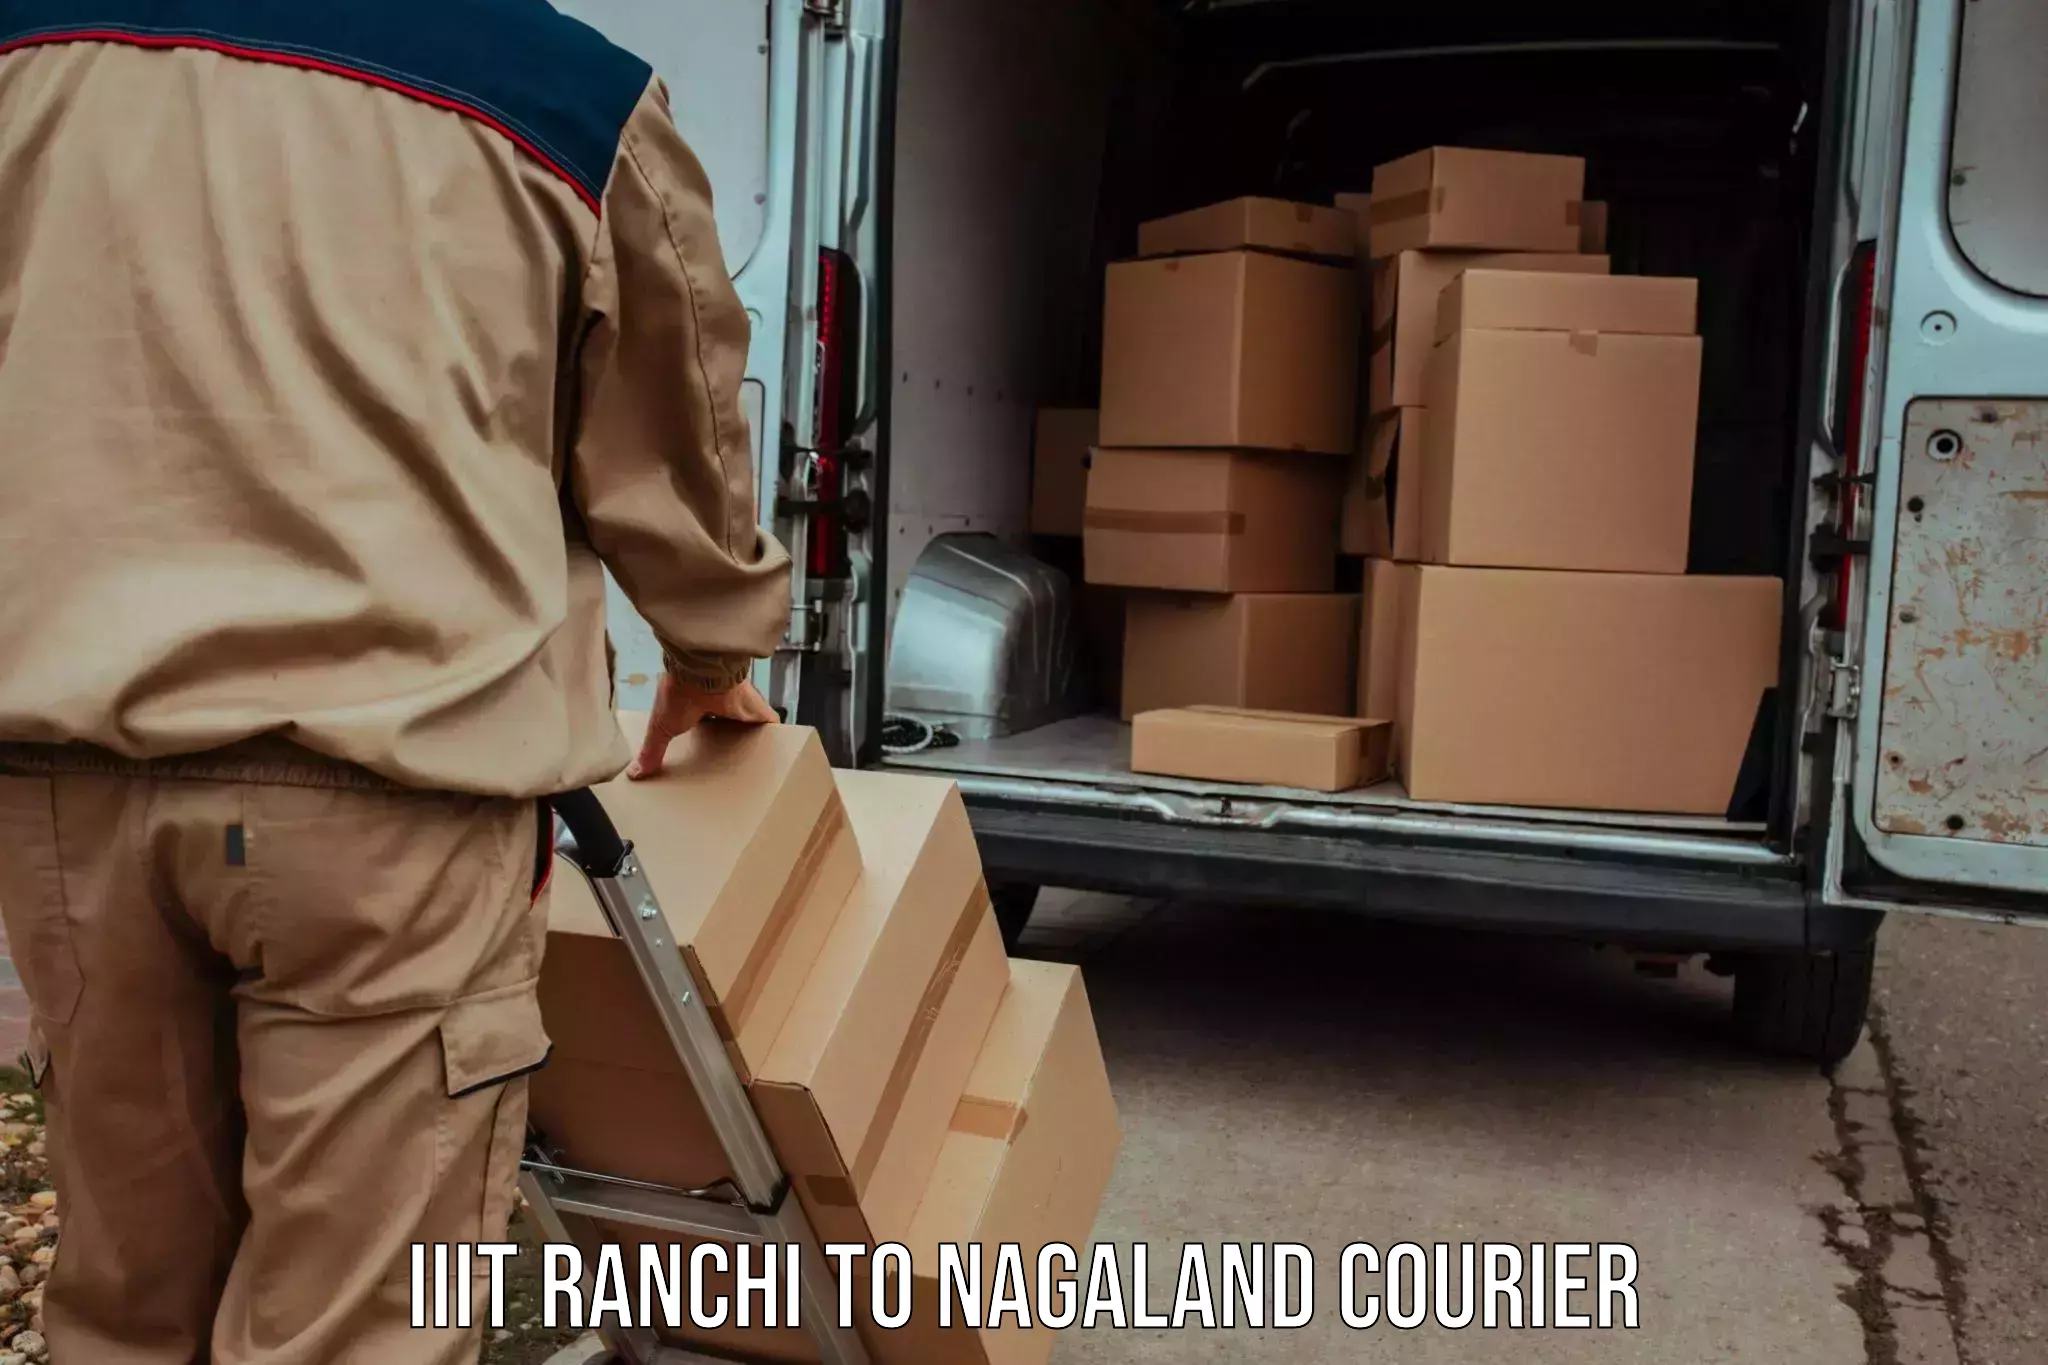 On-call courier service IIIT Ranchi to Nagaland